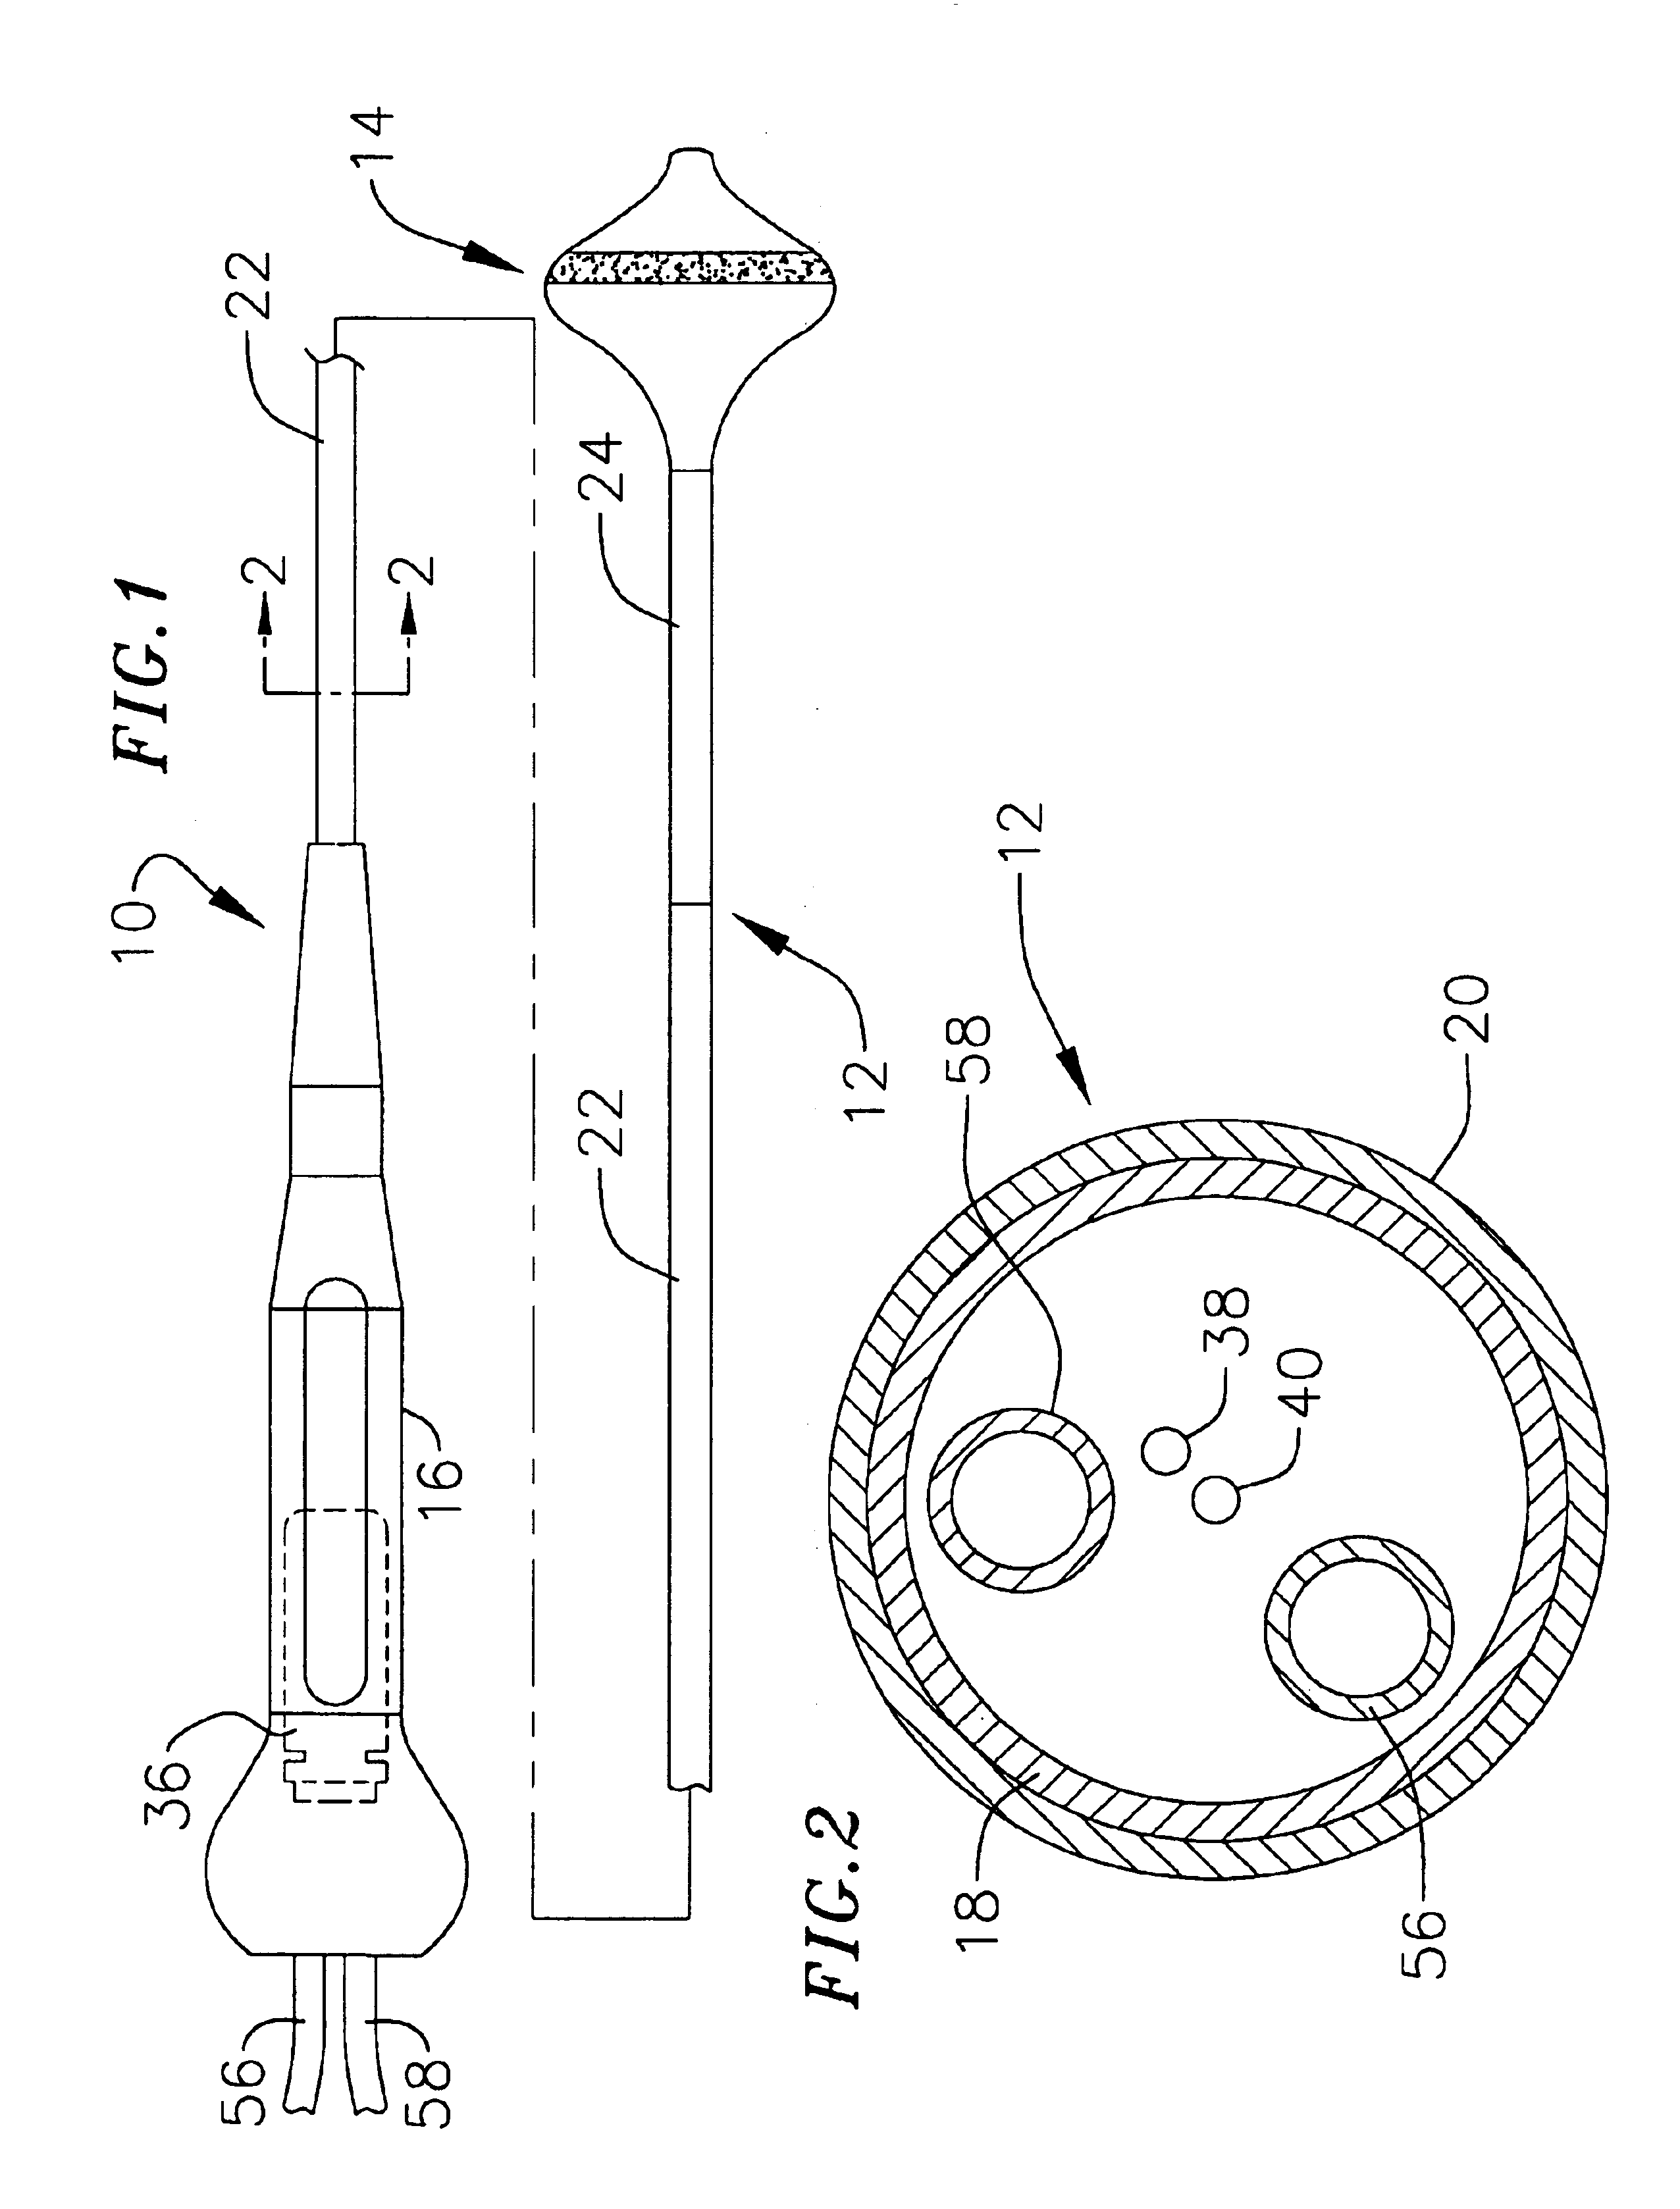 Surgical probe for supporting inflatable therapeutic devices in contact with tissue in or around body orifices and within tumors